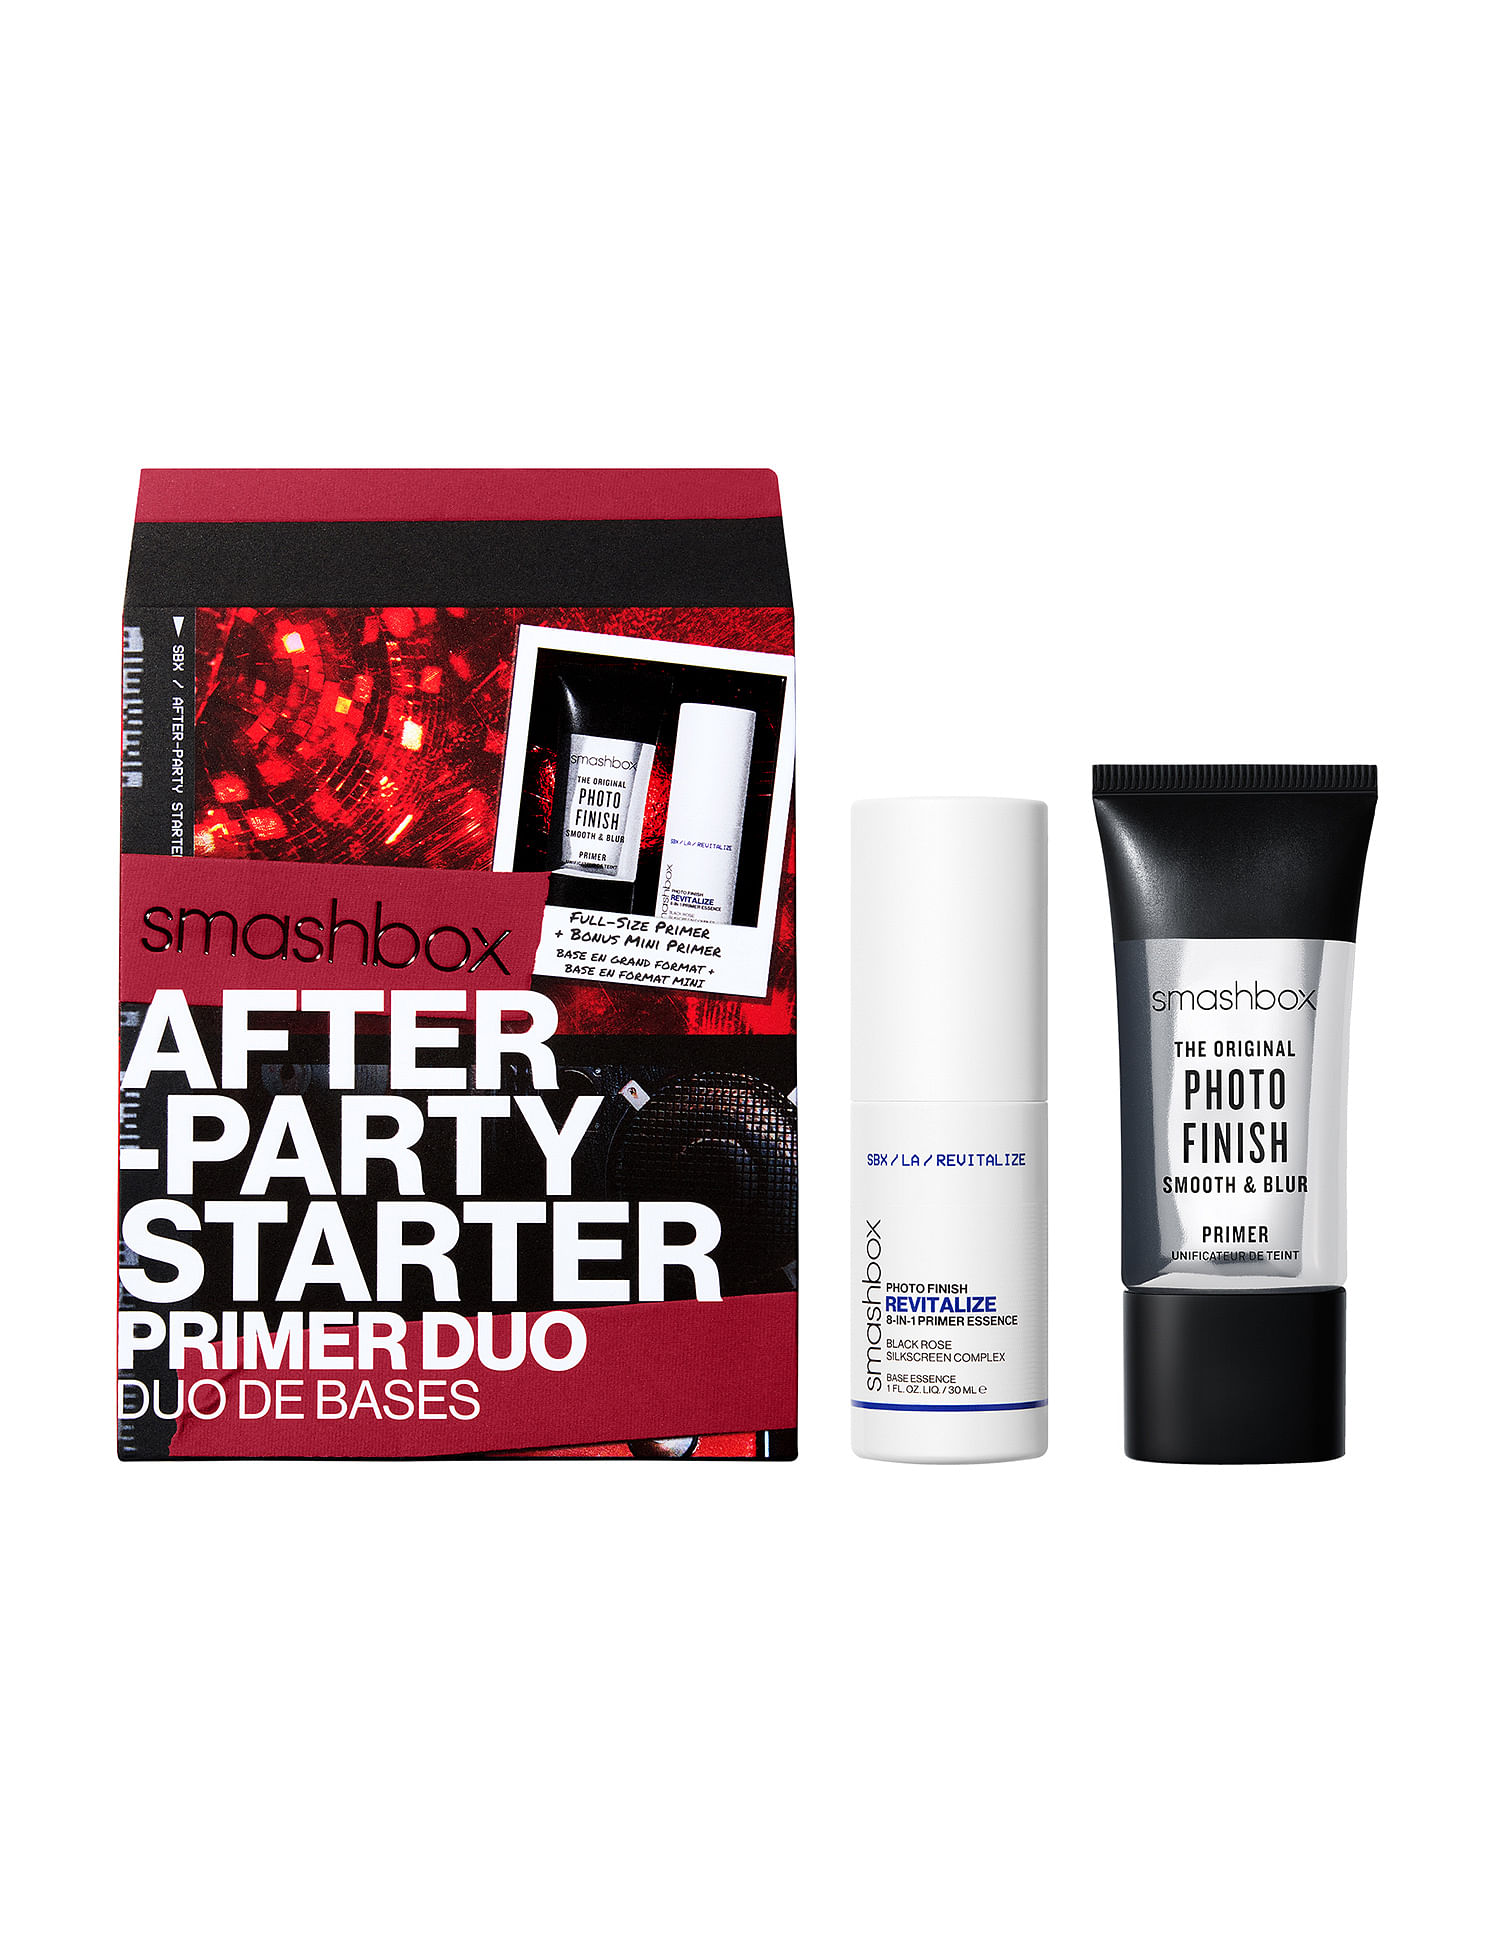 Buy Smashbox After-Party Starter Primer Duo